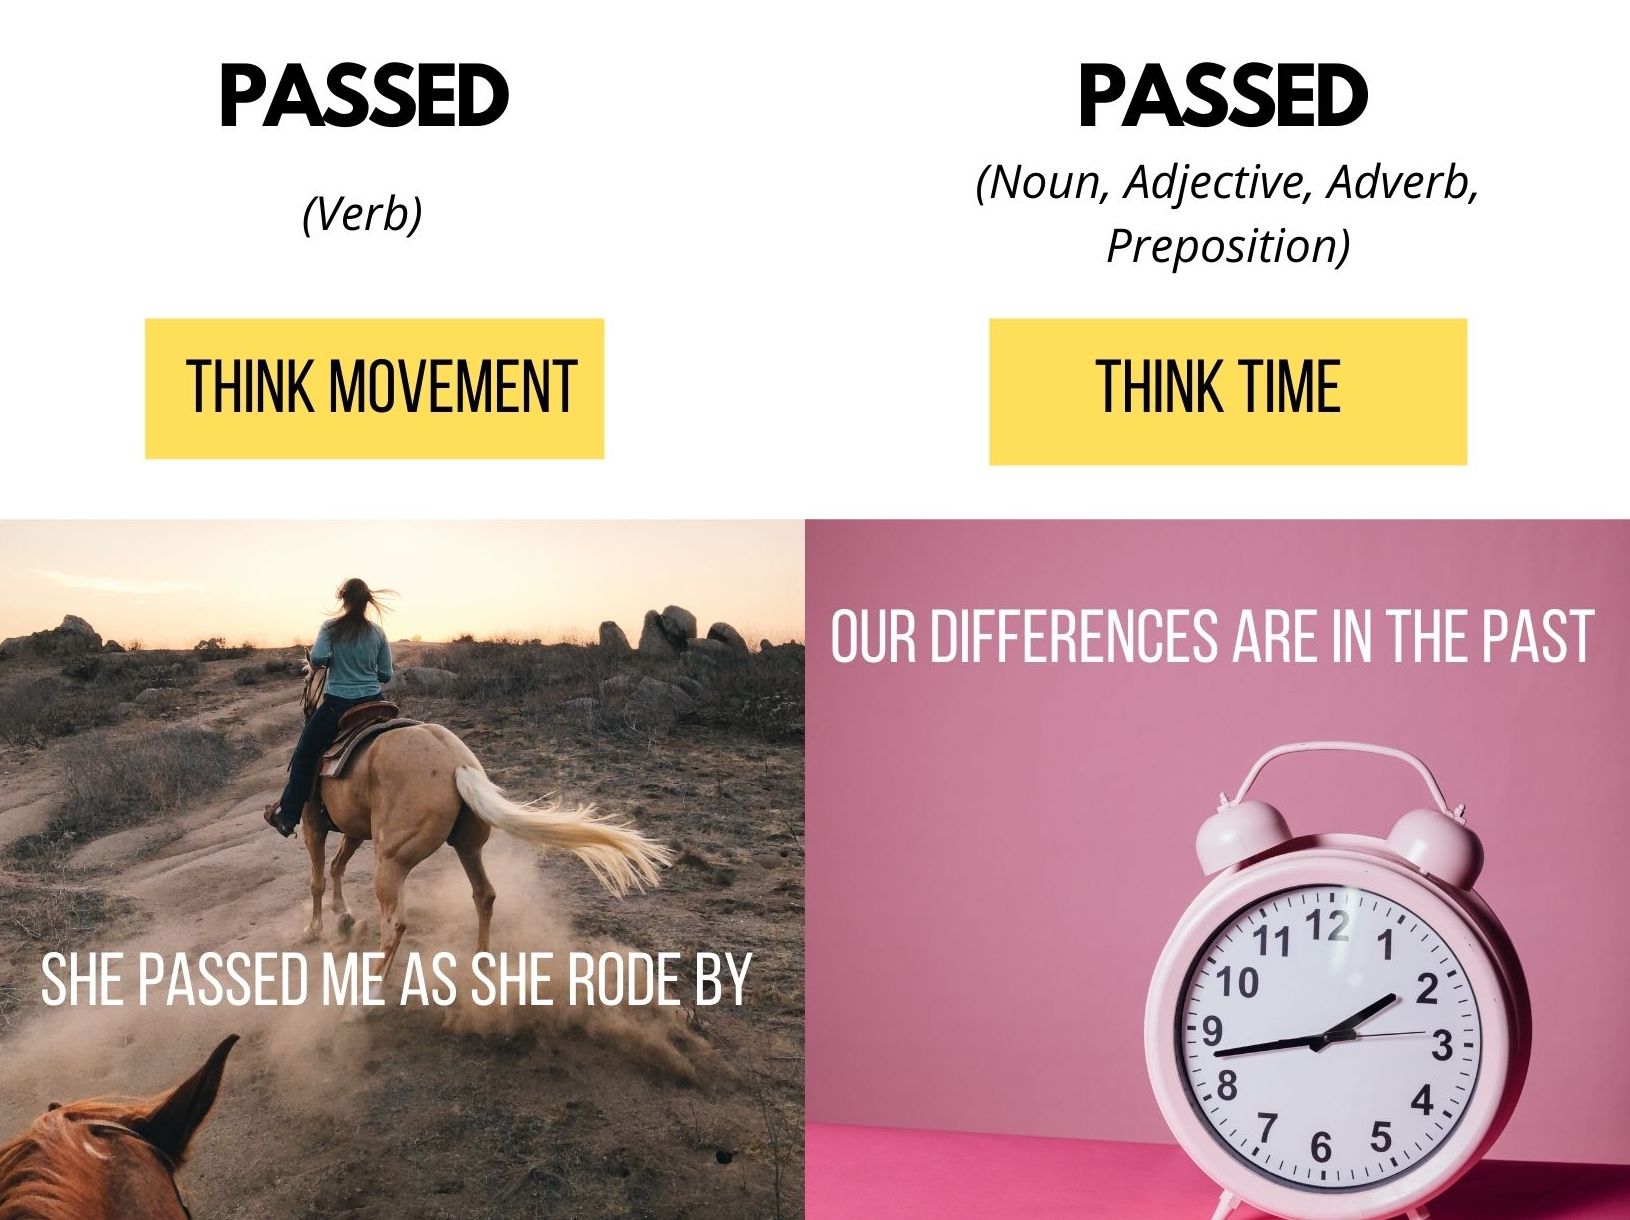 Graphic describing the difference between passed (movement) and past (time)